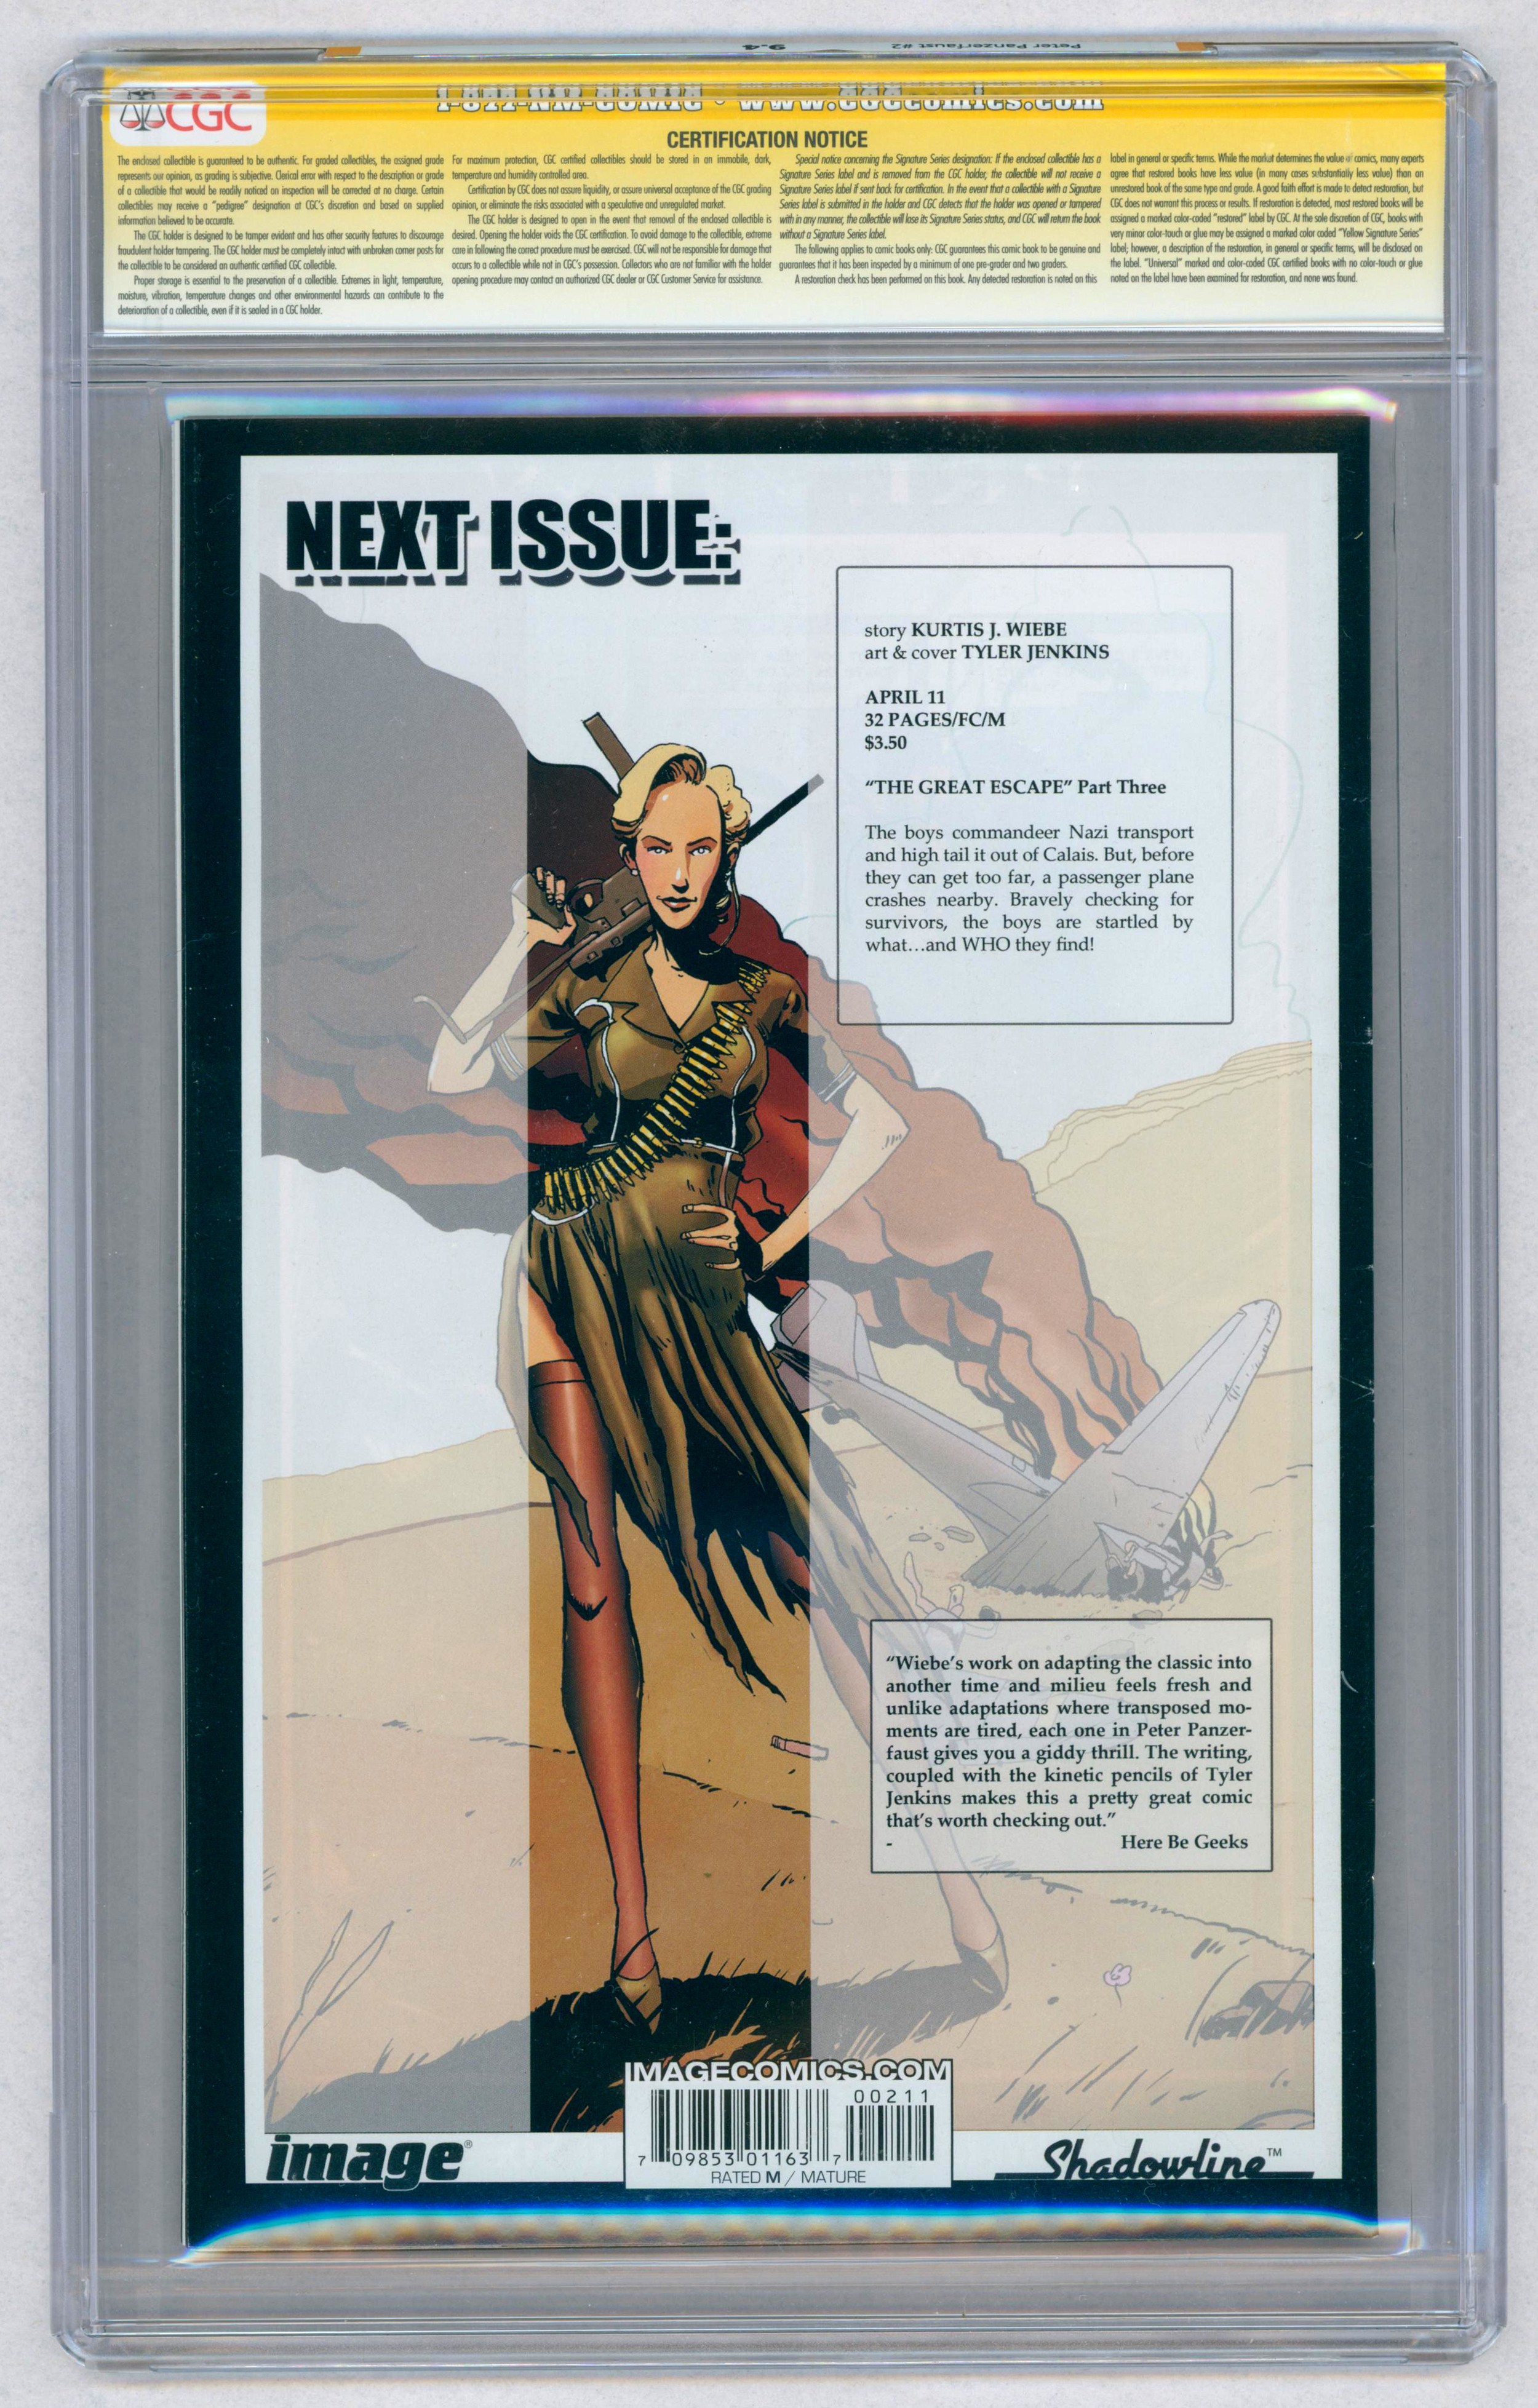 PETER PANZERFAUST #2-(May2012)-Graded 9.4 by CGC. Kurtis Wiebe story, Tyler Jenkins cover & art. - Image 2 of 2